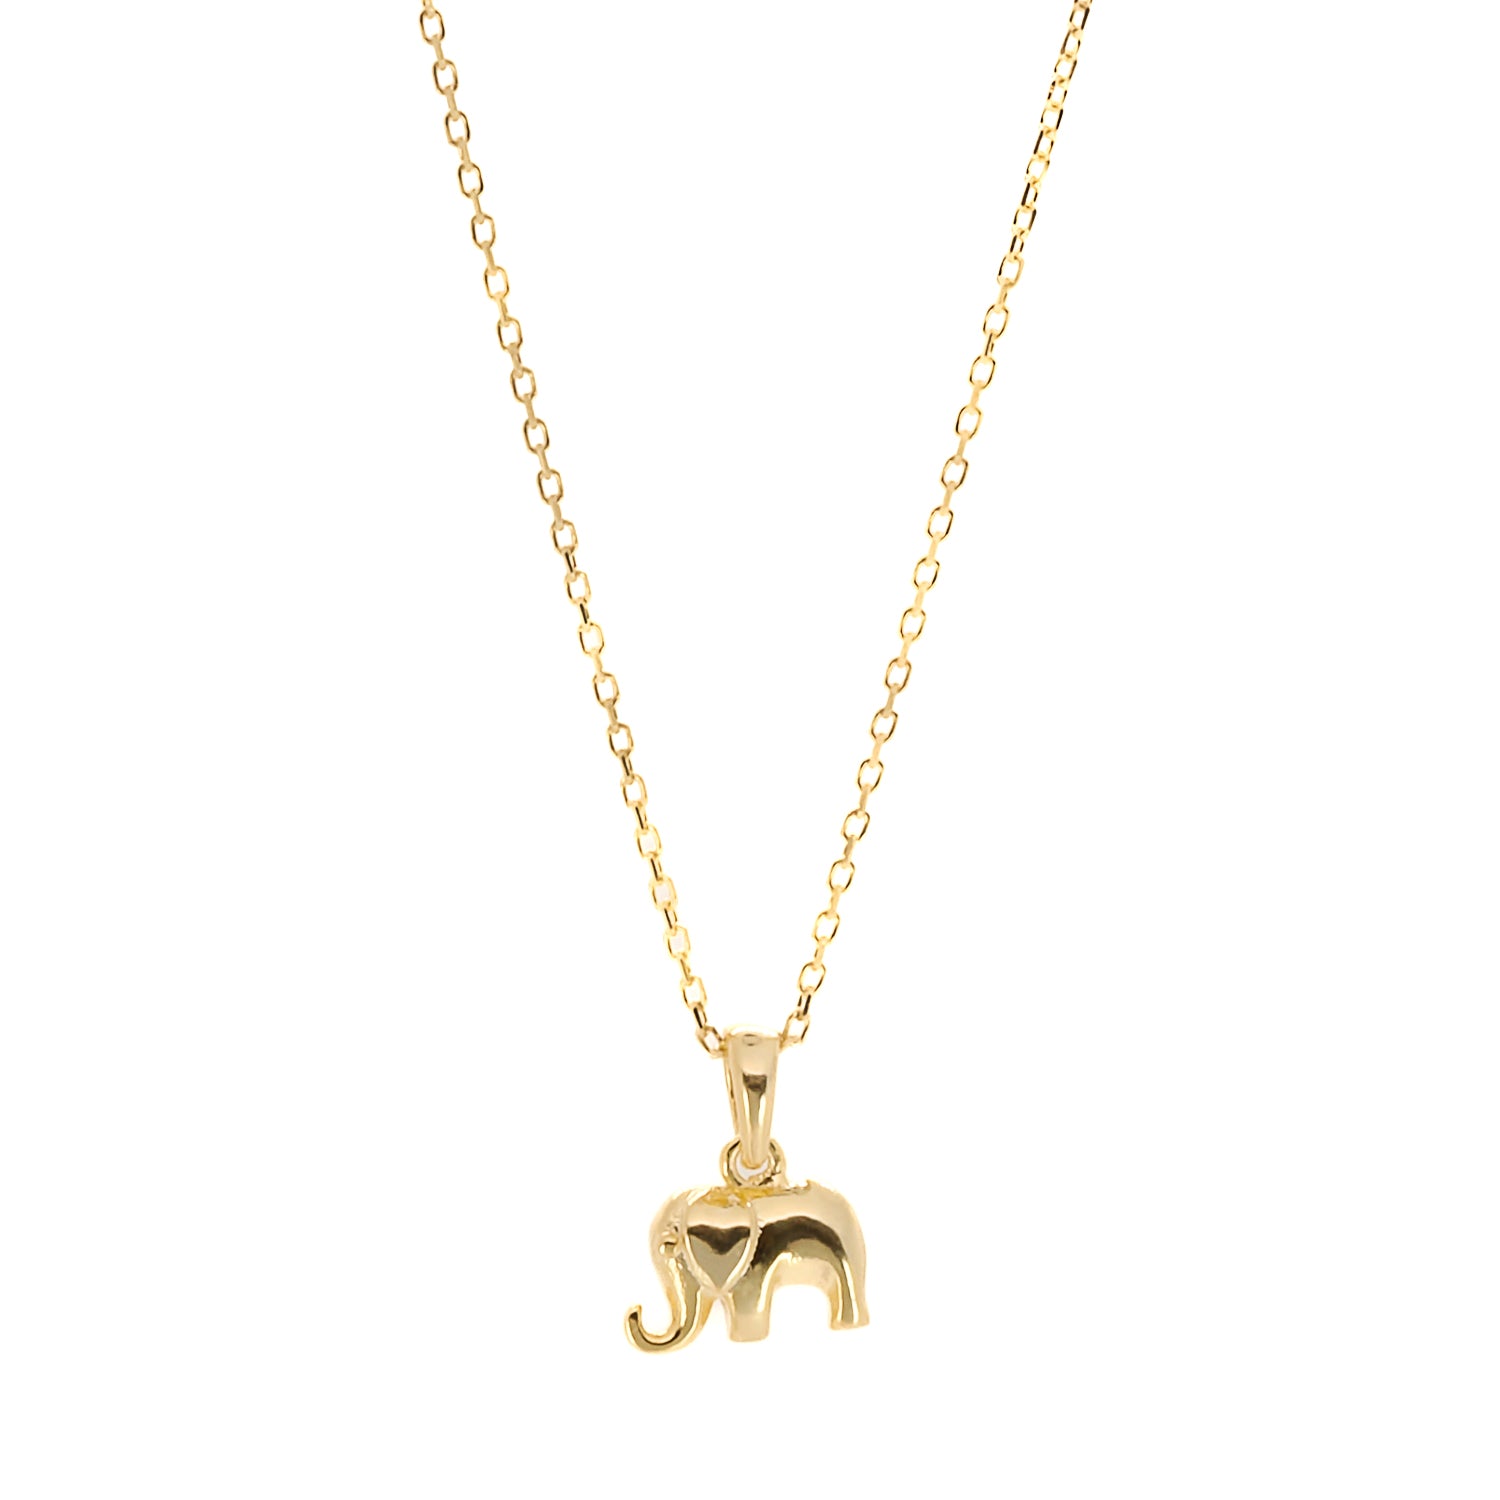 The Dainty Gold Elephant Necklace, featuring a petite elephant pendant on an 18K gold-plated sterling silver chain.